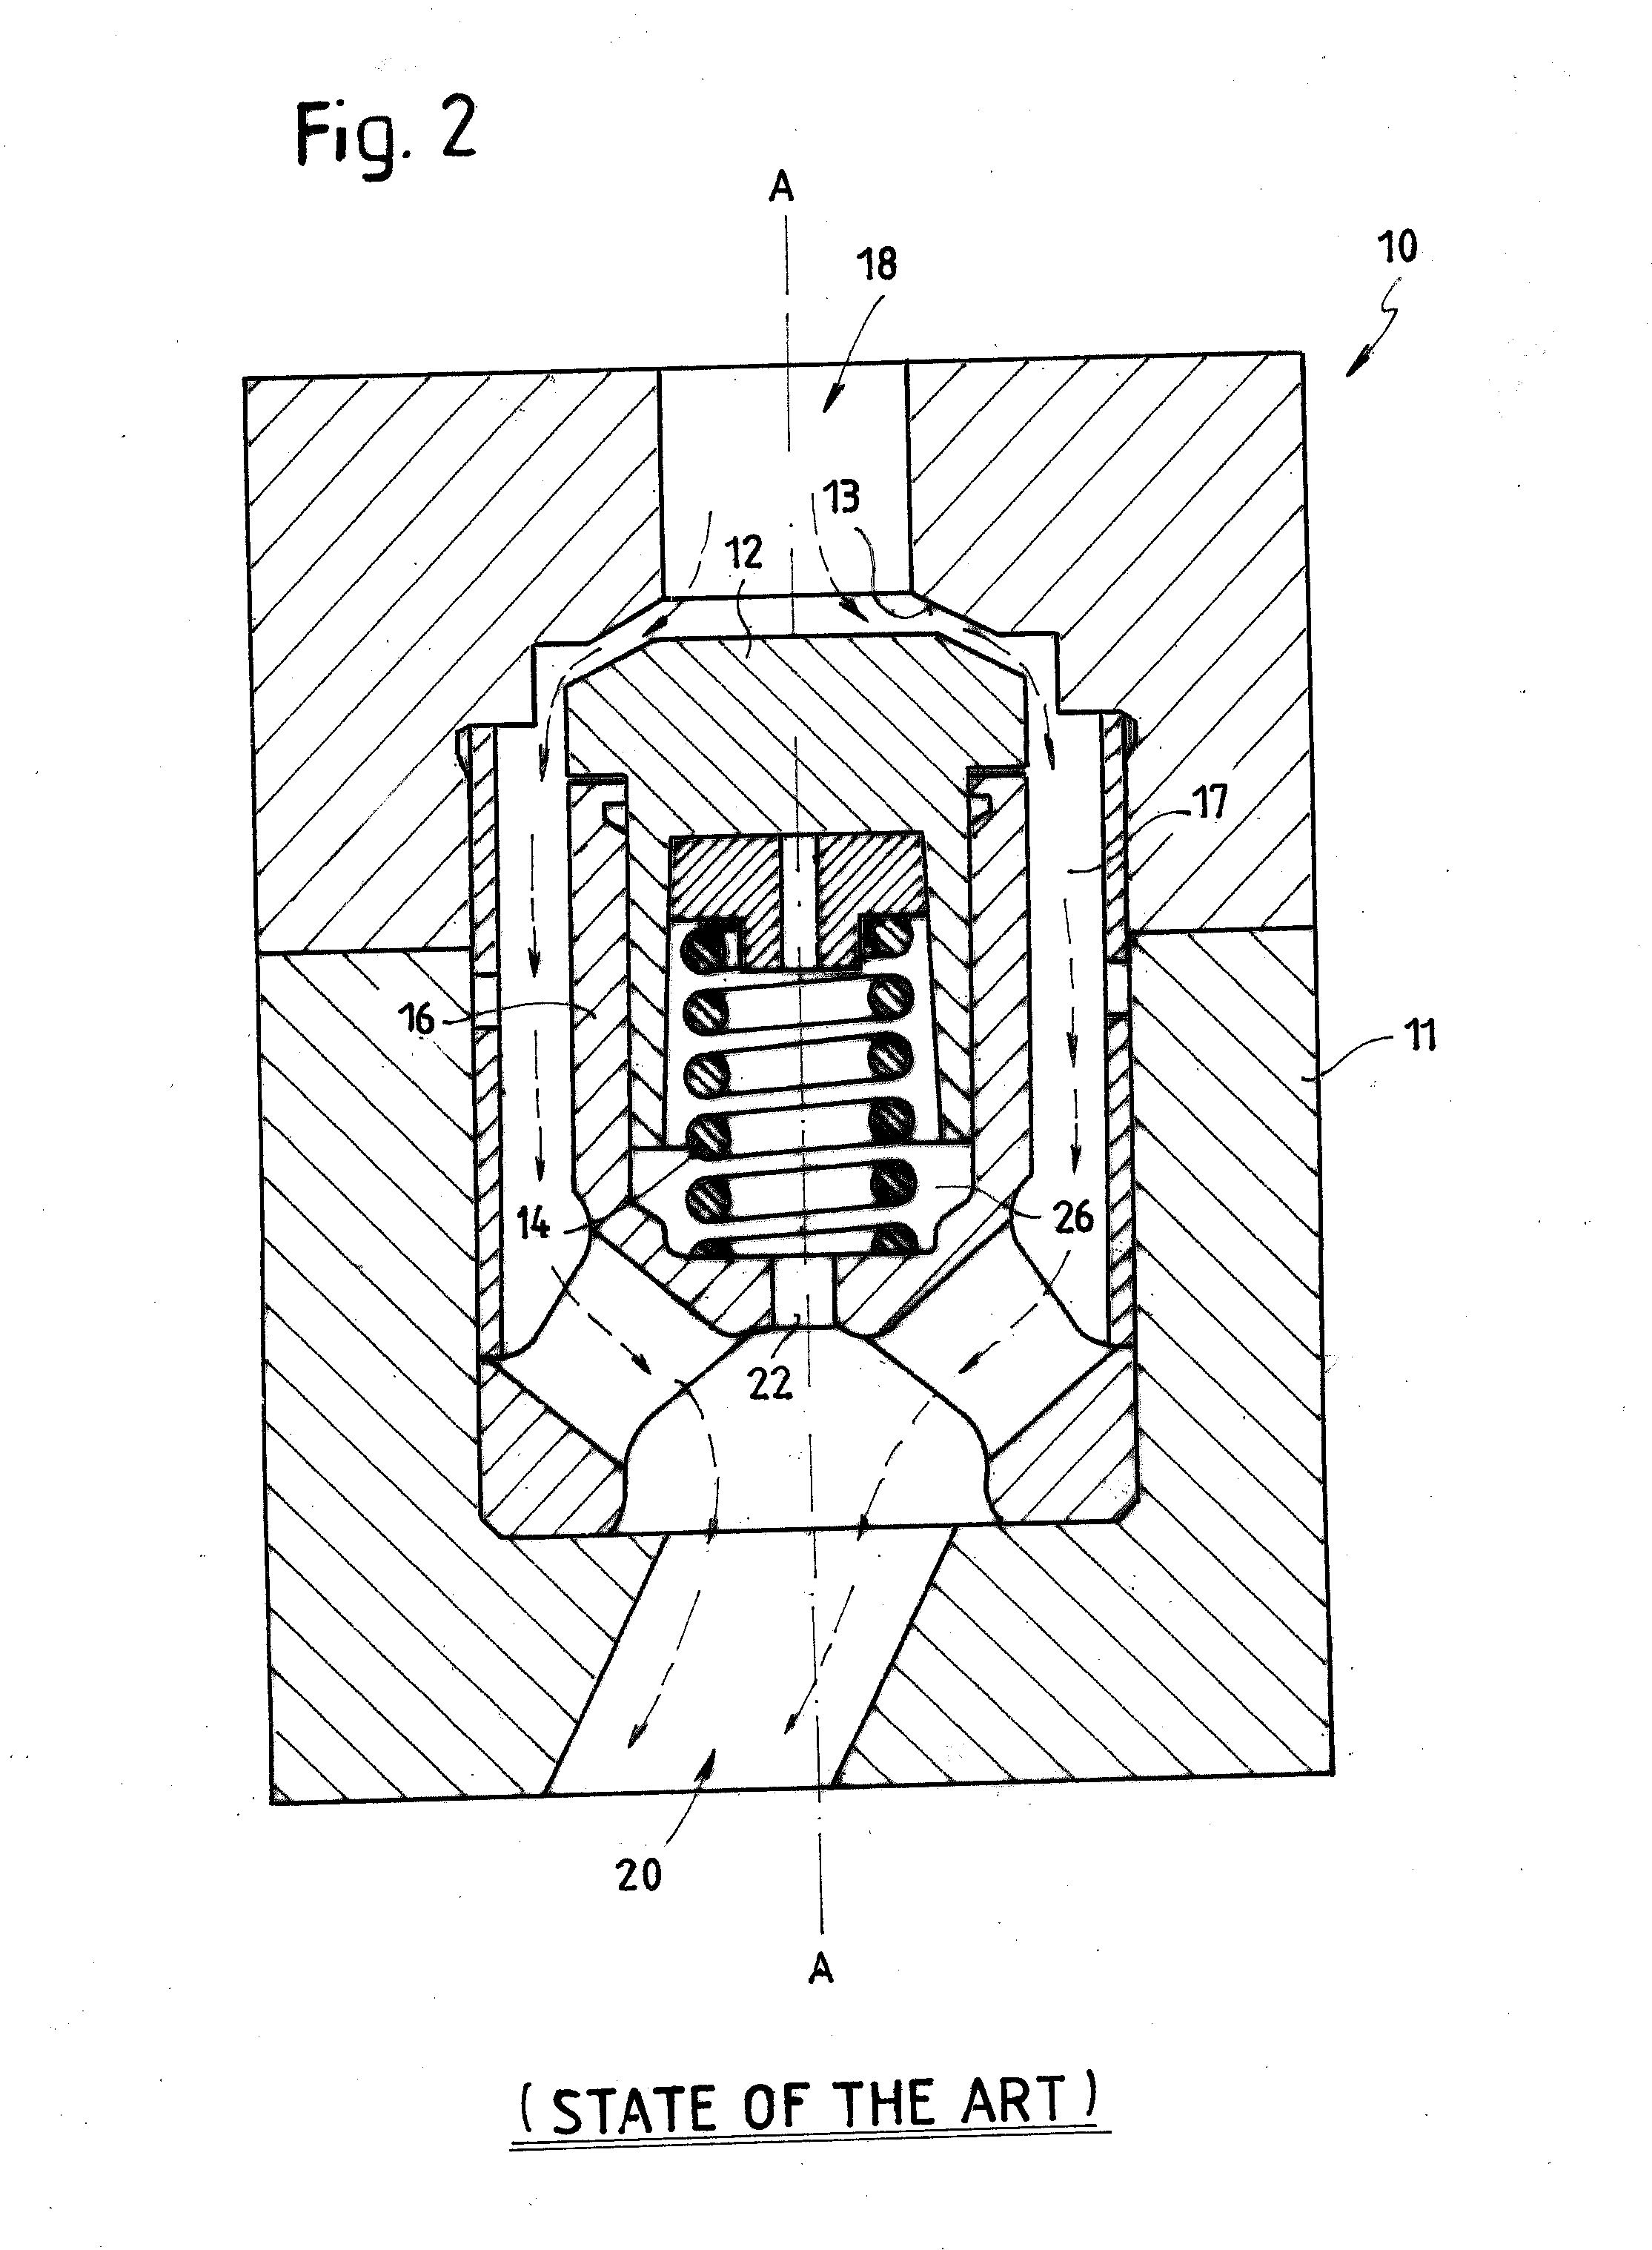 Poppet valve with an impact damper and method for reducing impact wear in hyper compressors